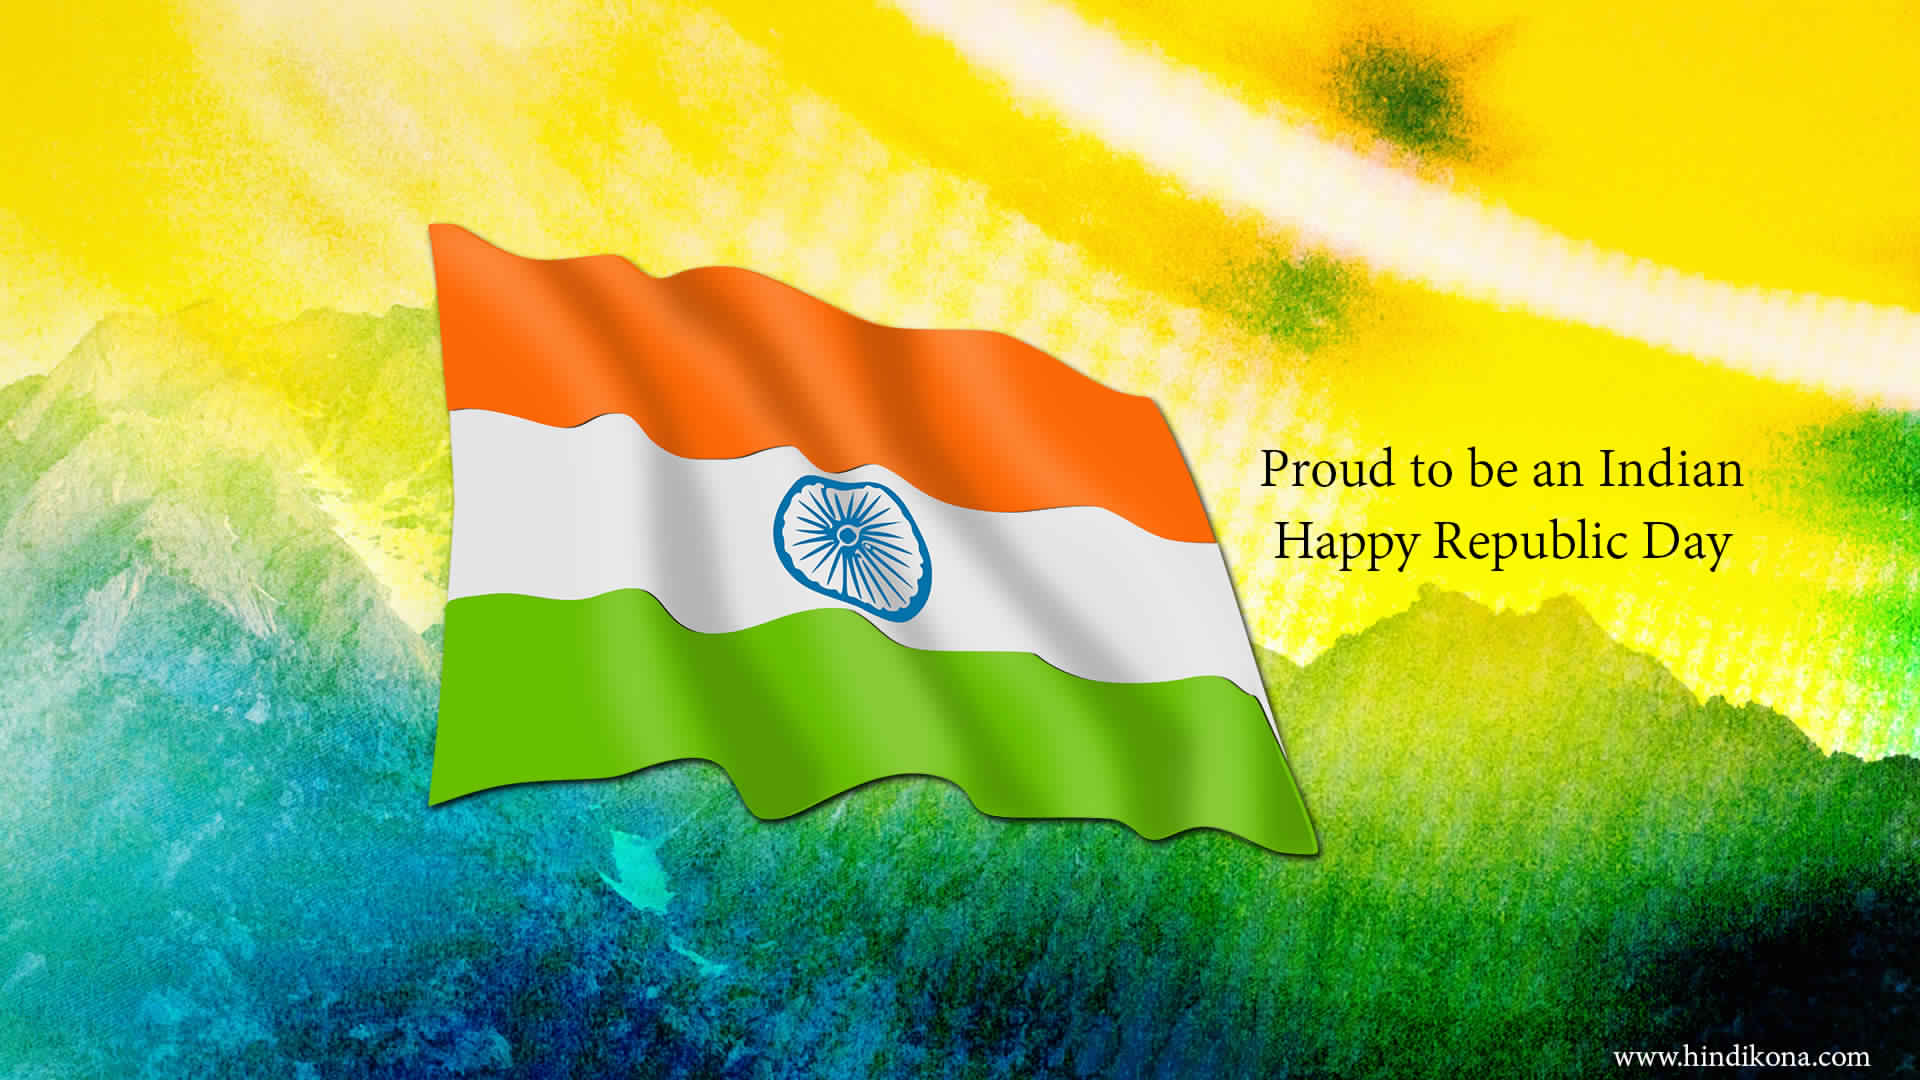 Indian Flag Wallpaper For Happy Republic Day Hd 1366768  Festivals